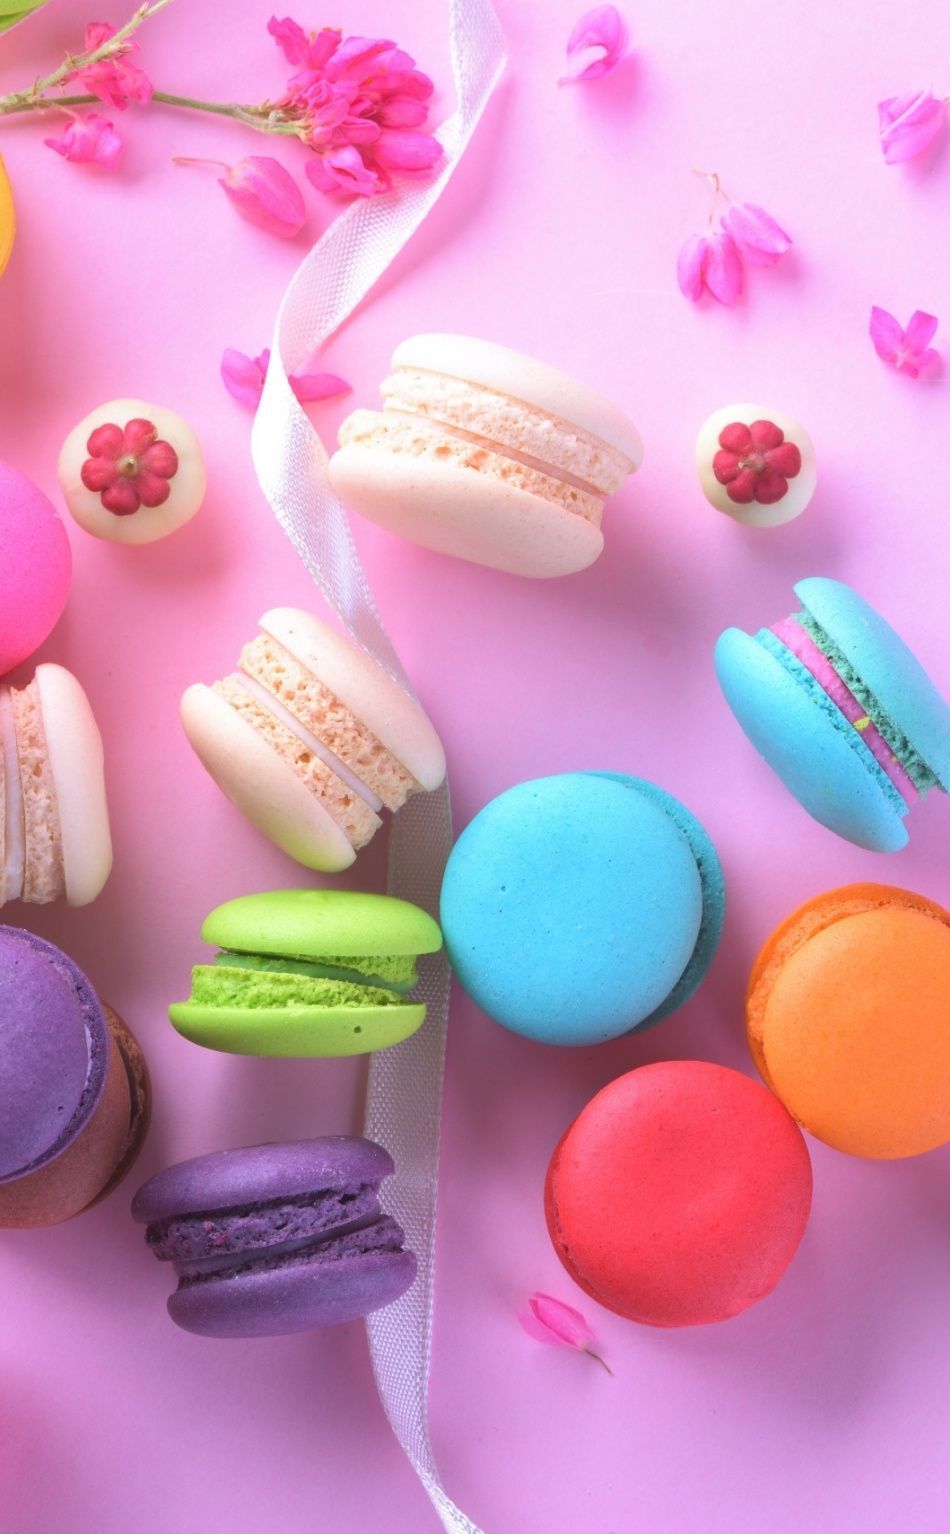 Sweet and yummy, colorful, macrons wallpaper. Macaroon wallpaper, Rainbow food, Cute desserts